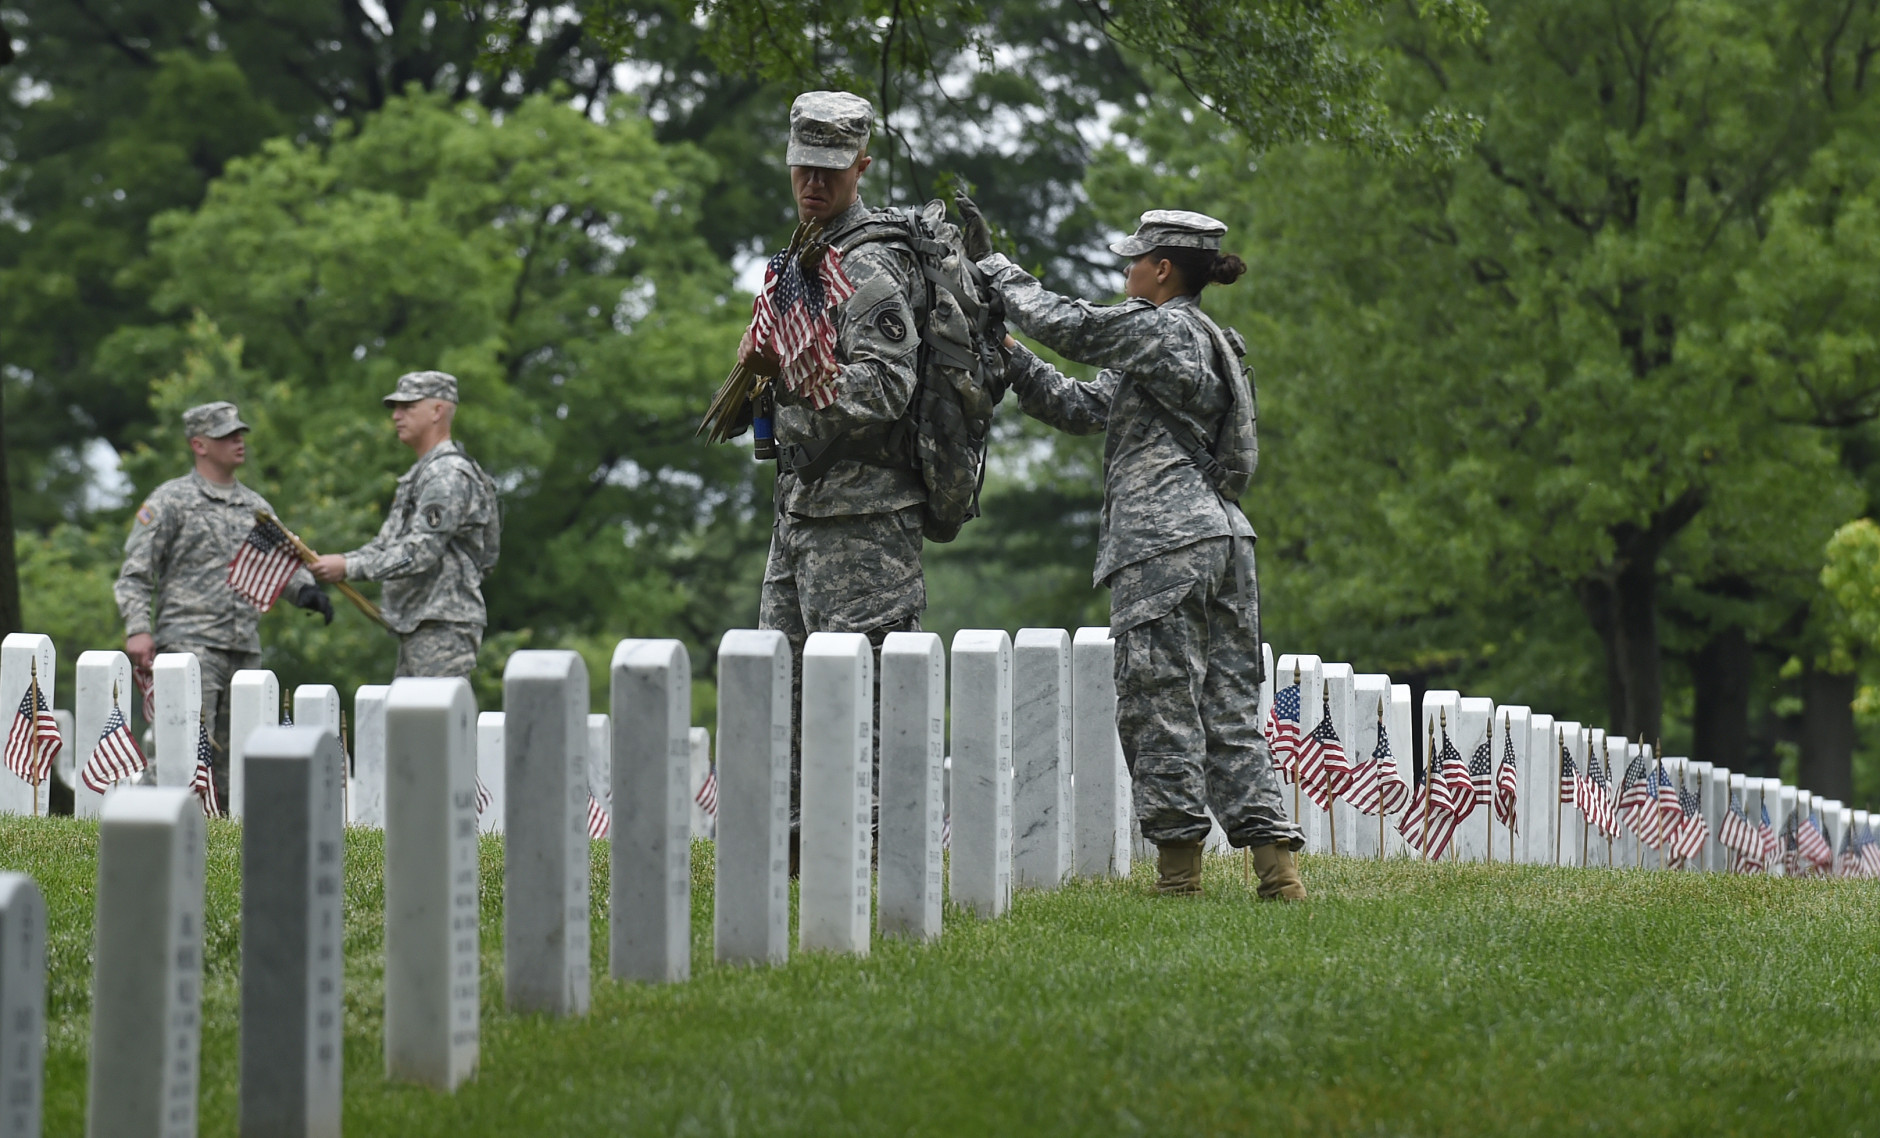 Members of the Old Guard place a flag in front of each headstone at Arlington National Cemetery in Arlington, Va., Thursday, May 21, 2015. Flags-In is a time honored tradition that is reserved for Soldiers of the 3rd U.S. Infantry Regiment (The Old Guard).  Since The Old Guard's designation as the Armys official ceremonial unit in 1948, they have conducted this mission annually at Arlington National Cemetery prior to Memorial Day to honor our nations fallen military heroes. (AP Photo/Susan Walsh)